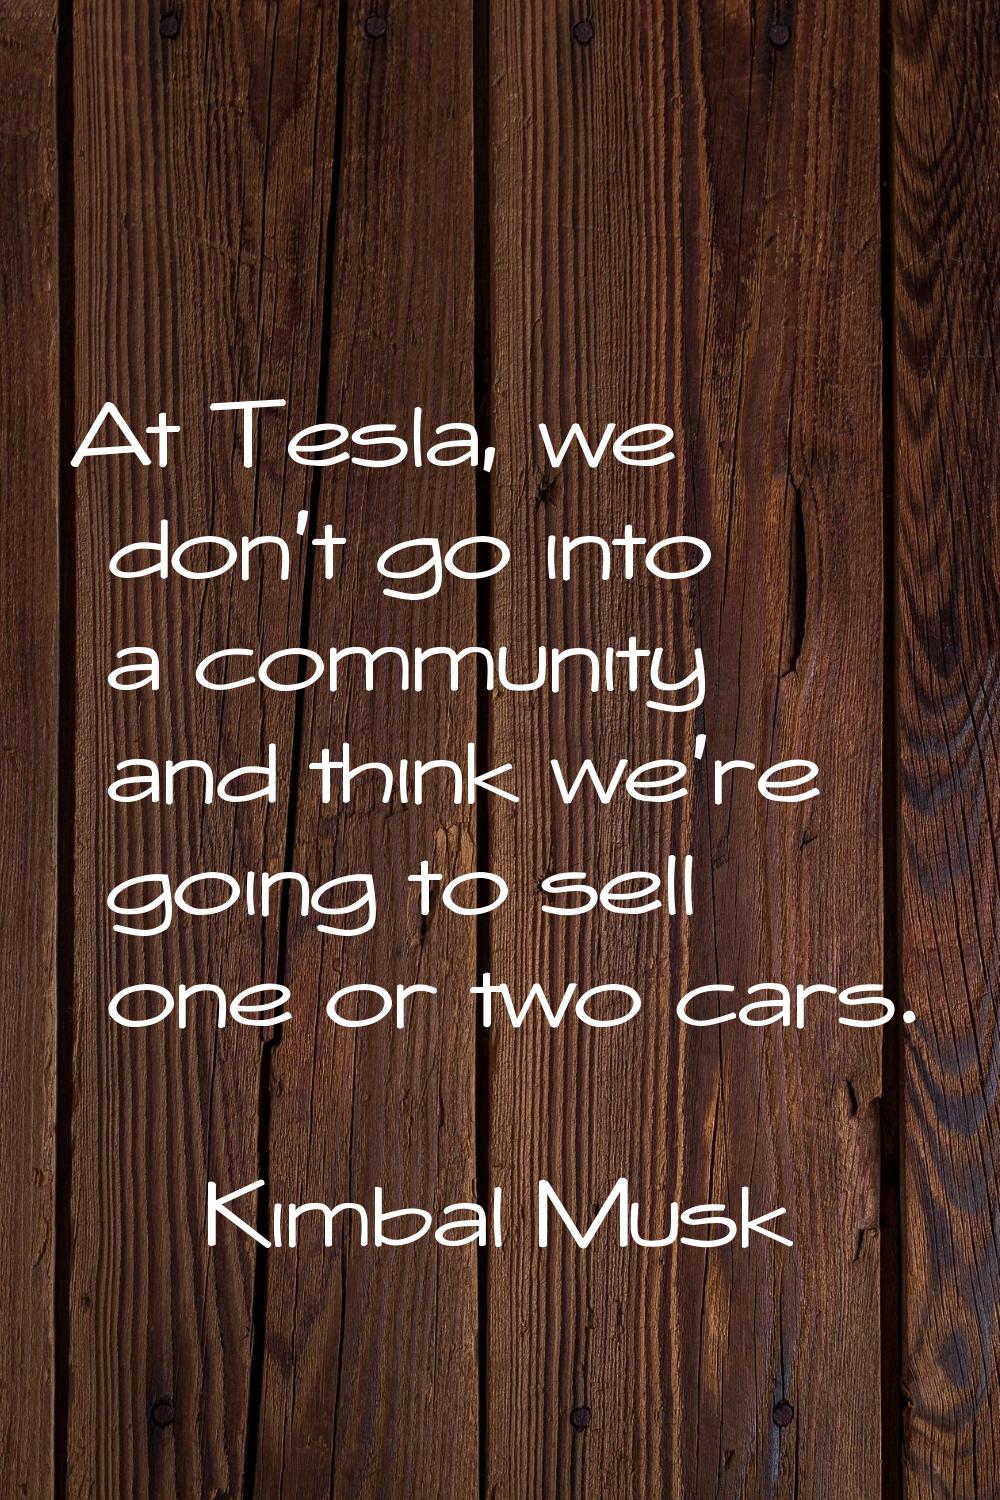 At Tesla, we don't go into a community and think we're going to sell one or two cars.